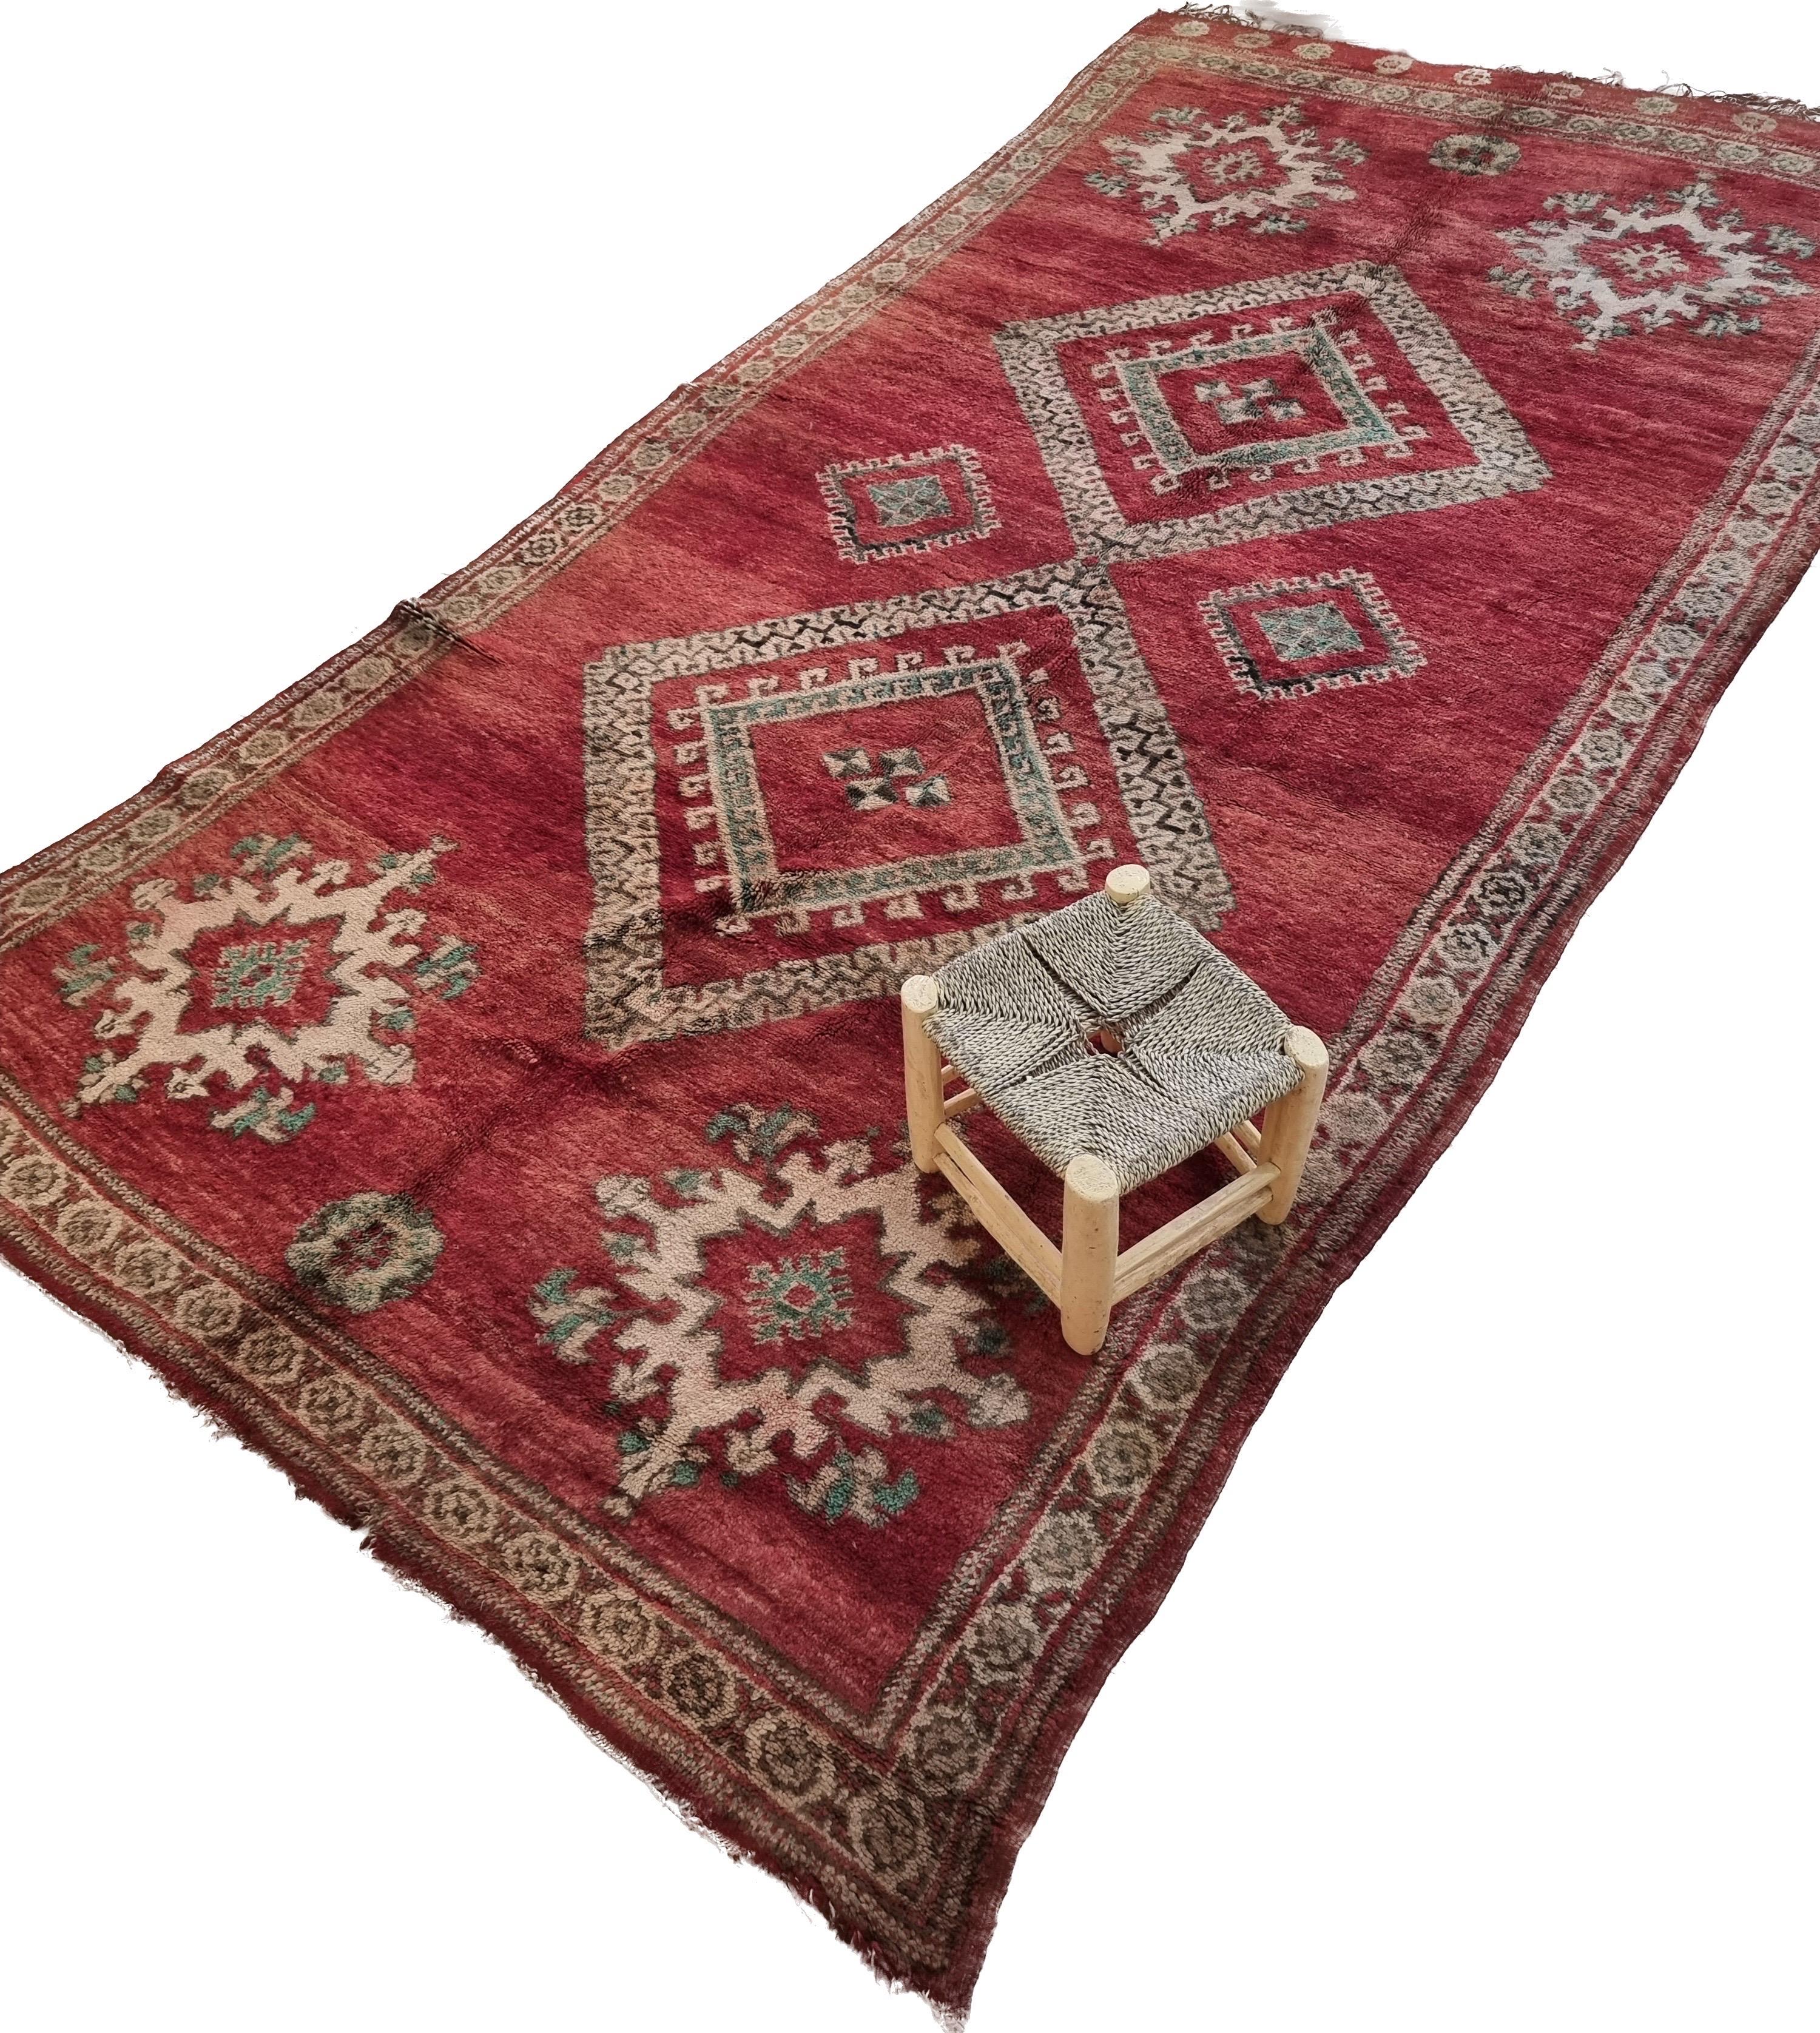 Rare vintage Moroccan Rug.
Every rug owns its unique identity. Having a one of a kind rug at home with a beautiful backstory represents a life filled with historic and meaningful backgrounds. Each and every one of our rugs take long hours to